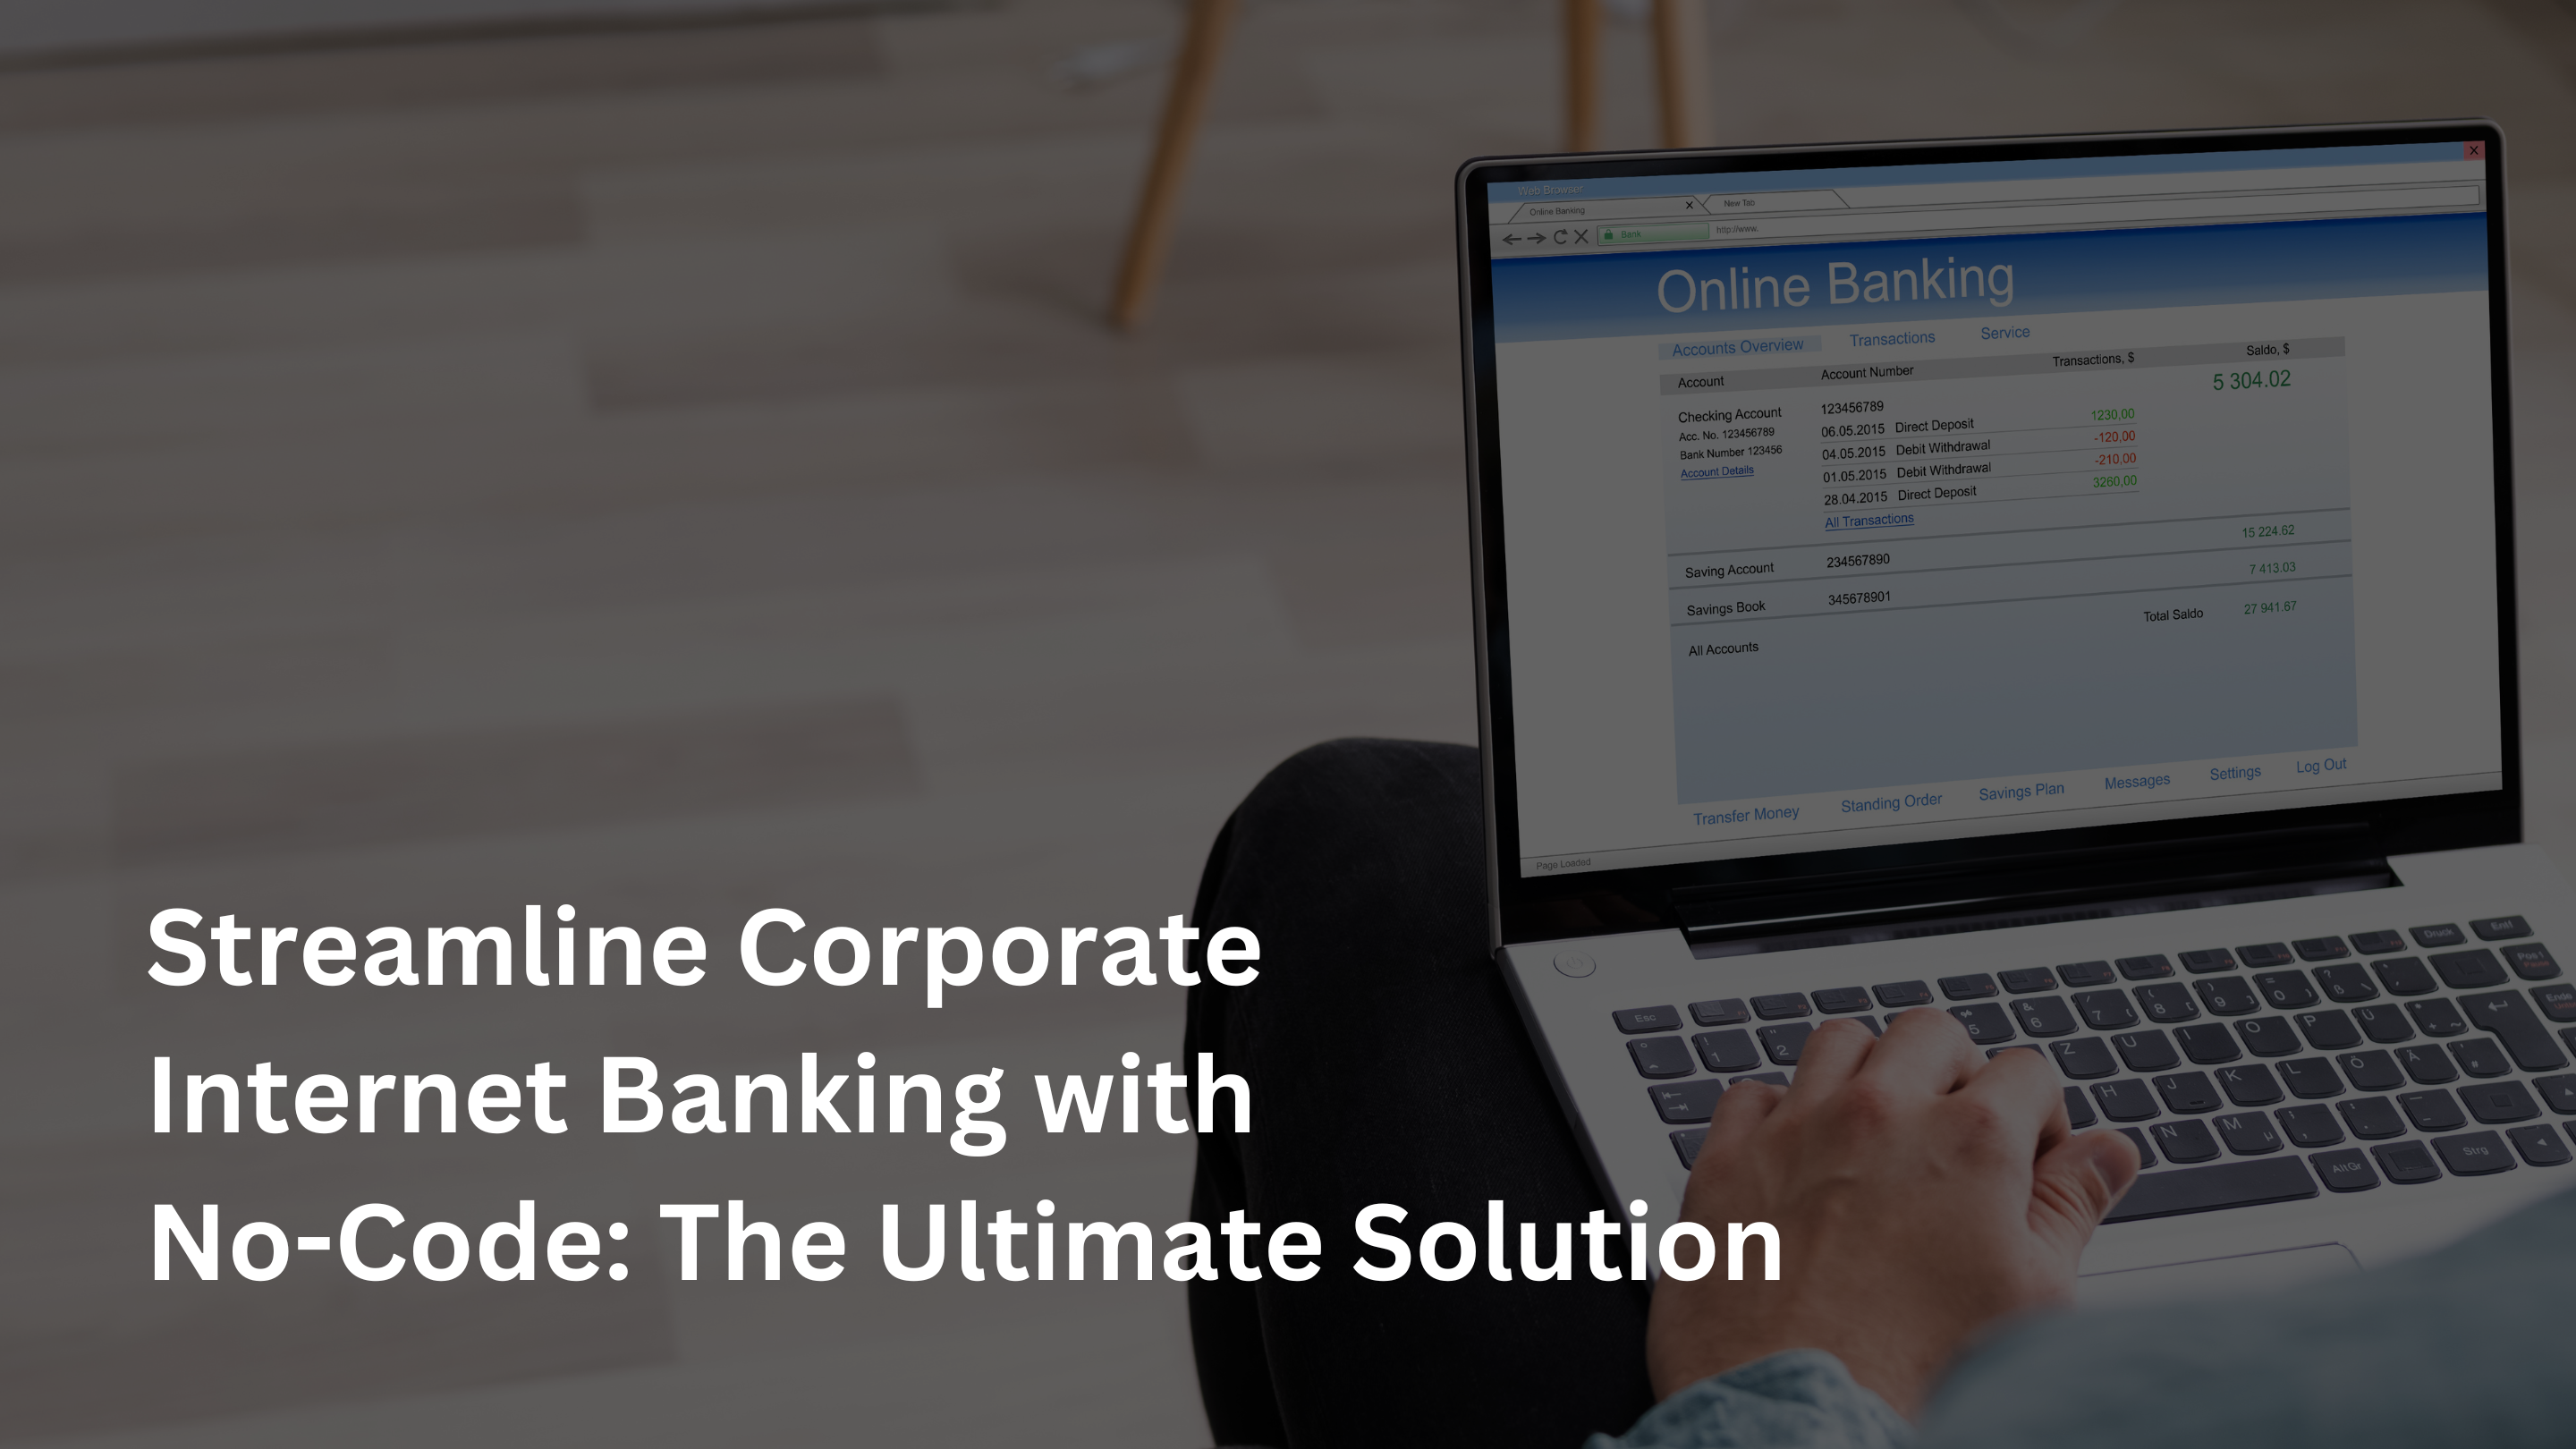 Streamline Corporate Internet Banking with No-Code The Ultimate Solution